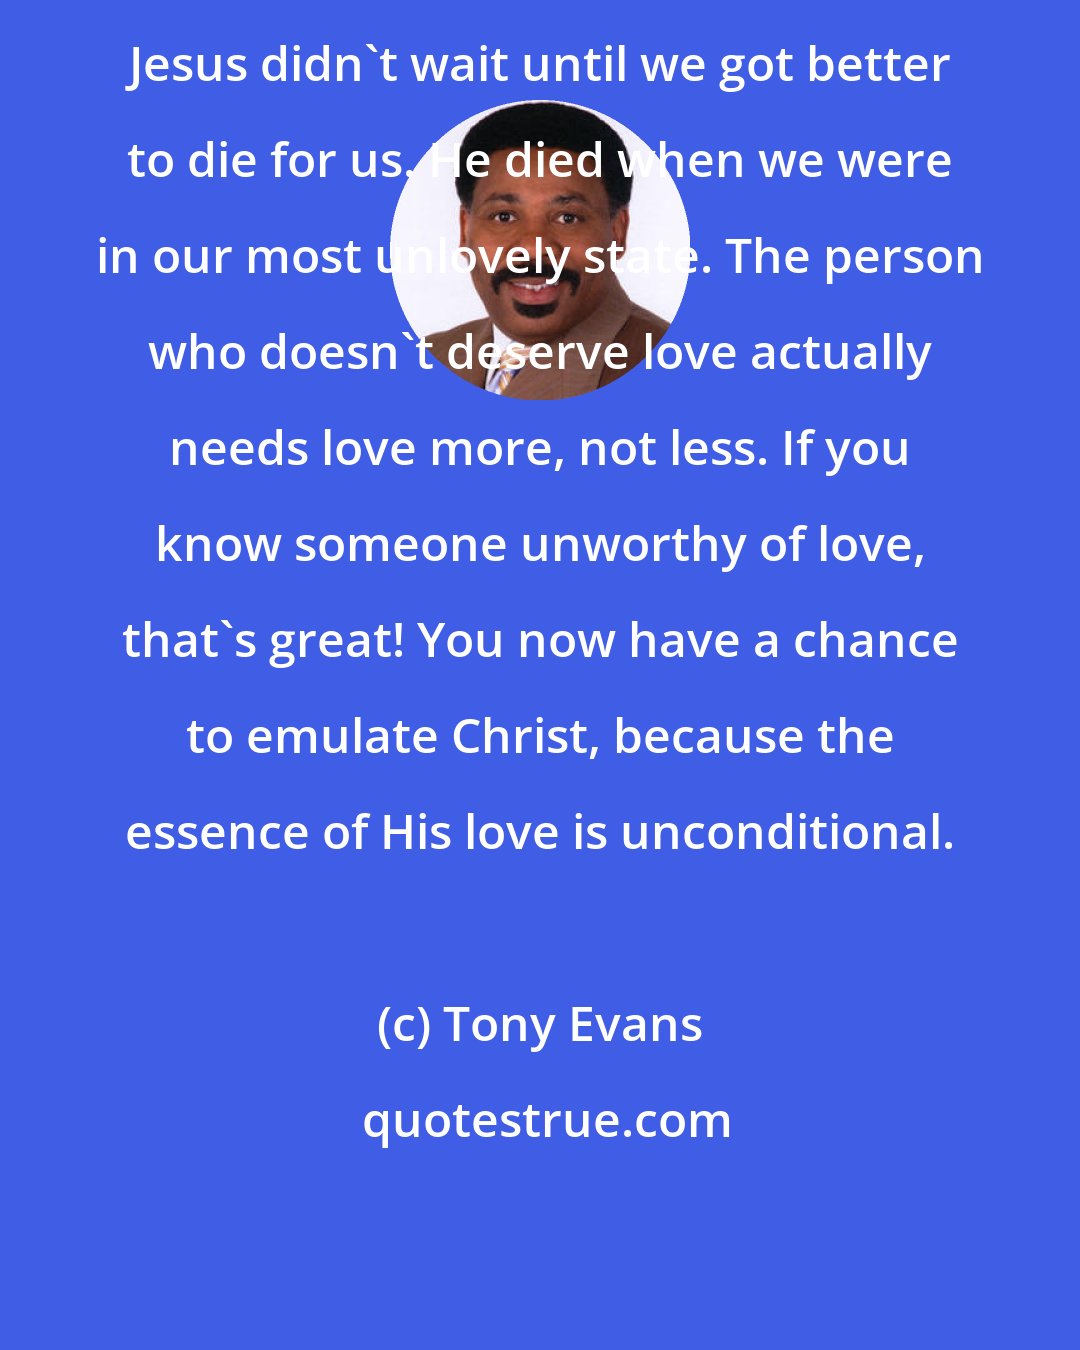 Tony Evans: Jesus didn't wait until we got better to die for us. He died when we were in our most unlovely state. The person who doesn't deserve love actually needs love more, not less. If you know someone unworthy of love, that's great! You now have a chance to emulate Christ, because the essence of His love is unconditional.